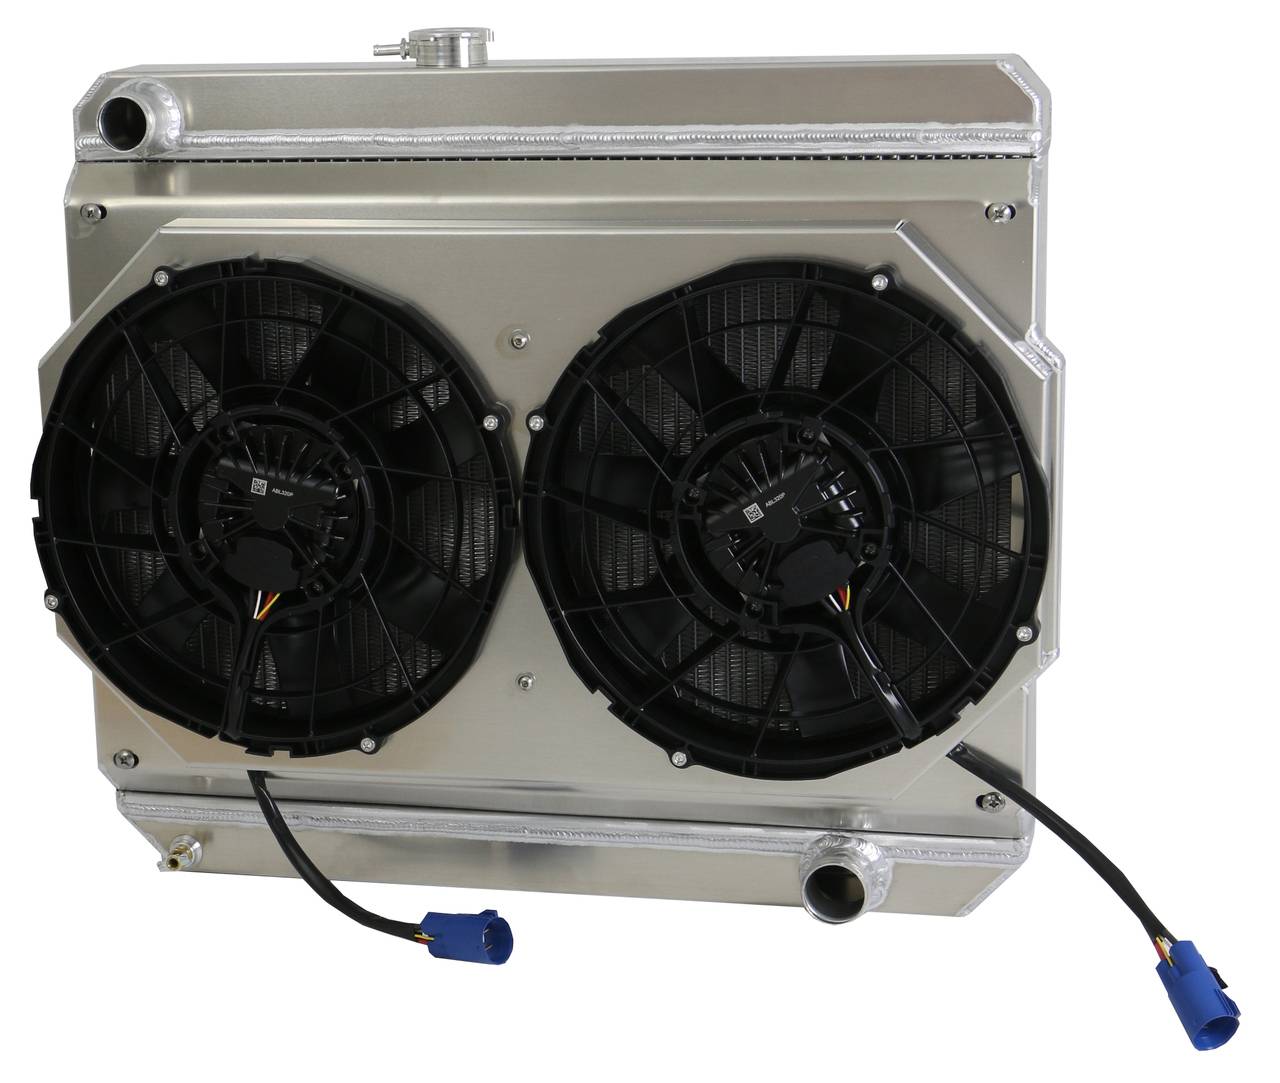 Wizard Cooling Inc - Wizard Cooling - 1966-1967 Chevrolet Bel Air/ Impala (17.5" Core, w/ Factory Air) Aluminum Radiator w/ BRUSHLESS FANS & Shroud - 27300-112BL